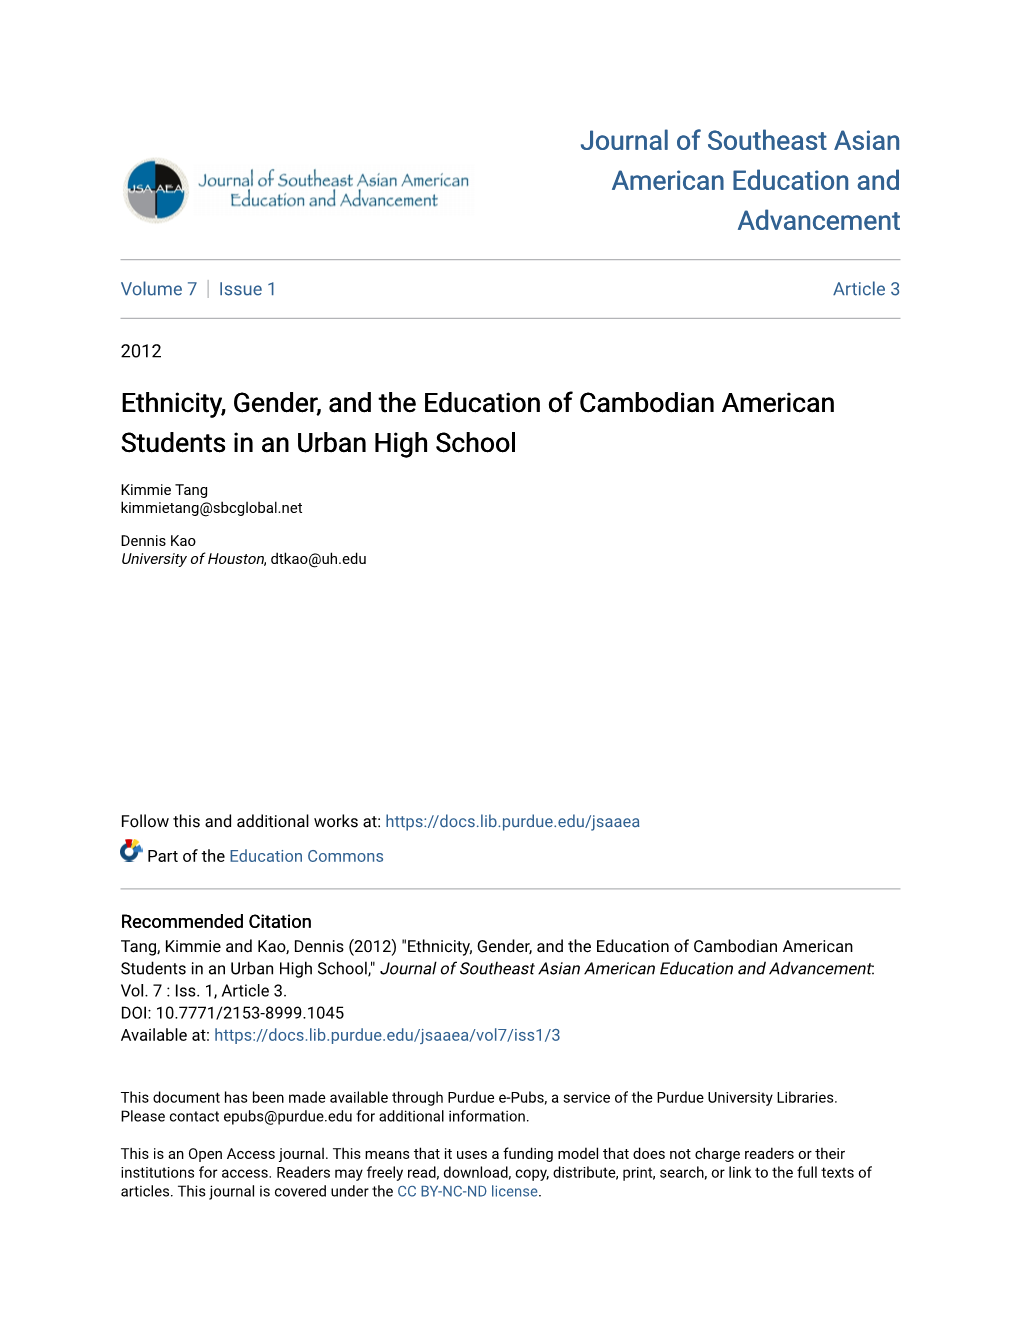 Ethnicity, Gender, and the Education of Cambodian American Students in an Urban High School